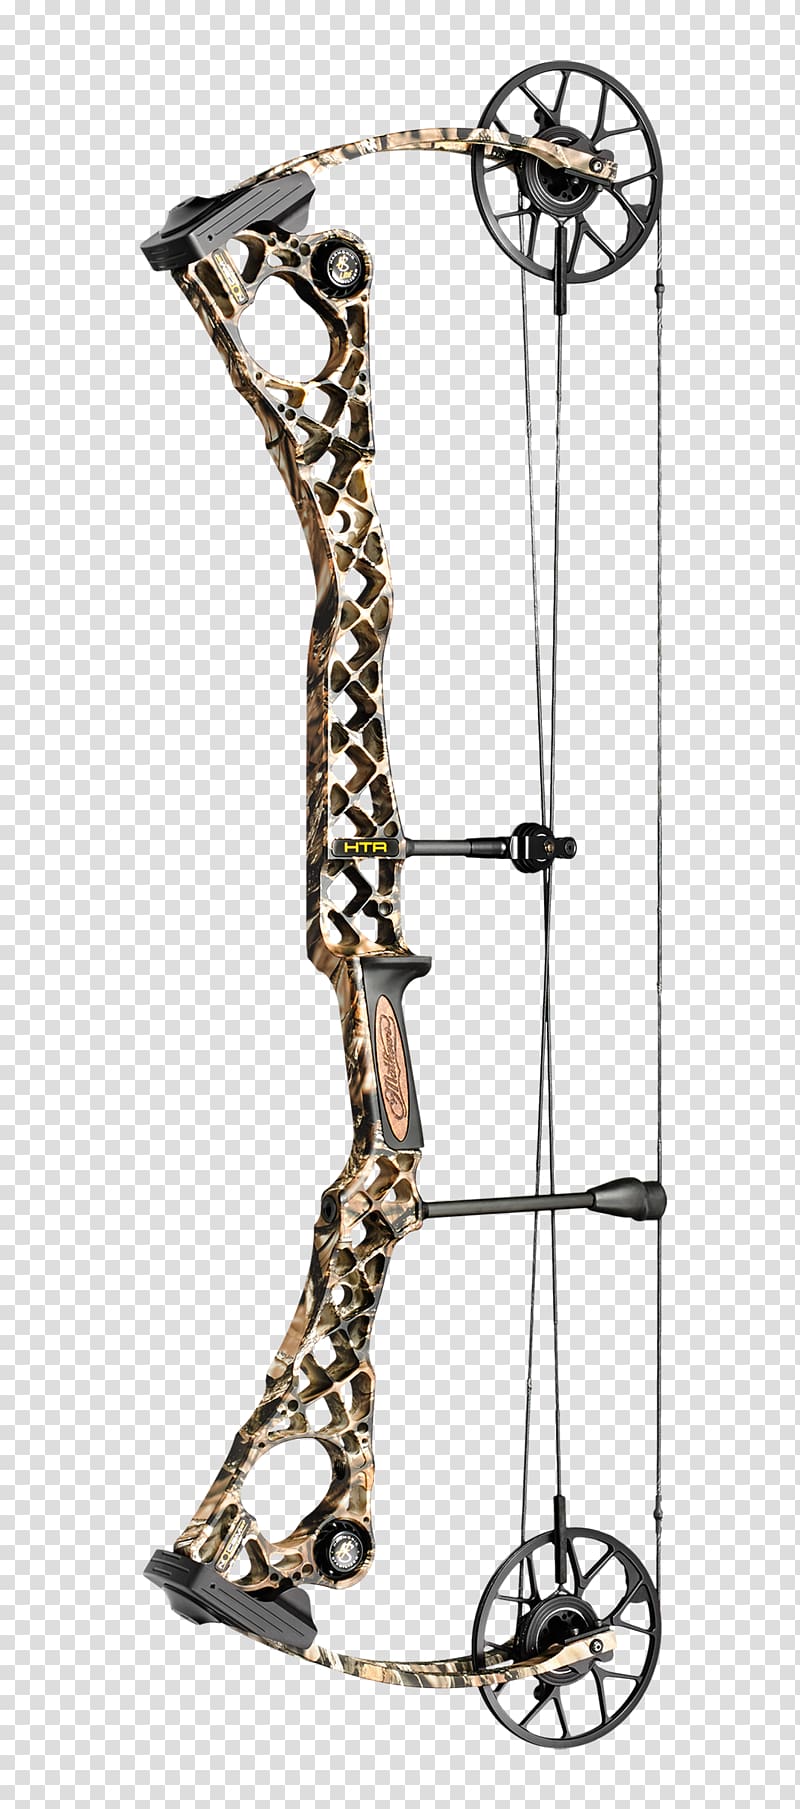 Bow and arrow Cam Compound Bows Bowhunting, archery transparent background PNG clipart